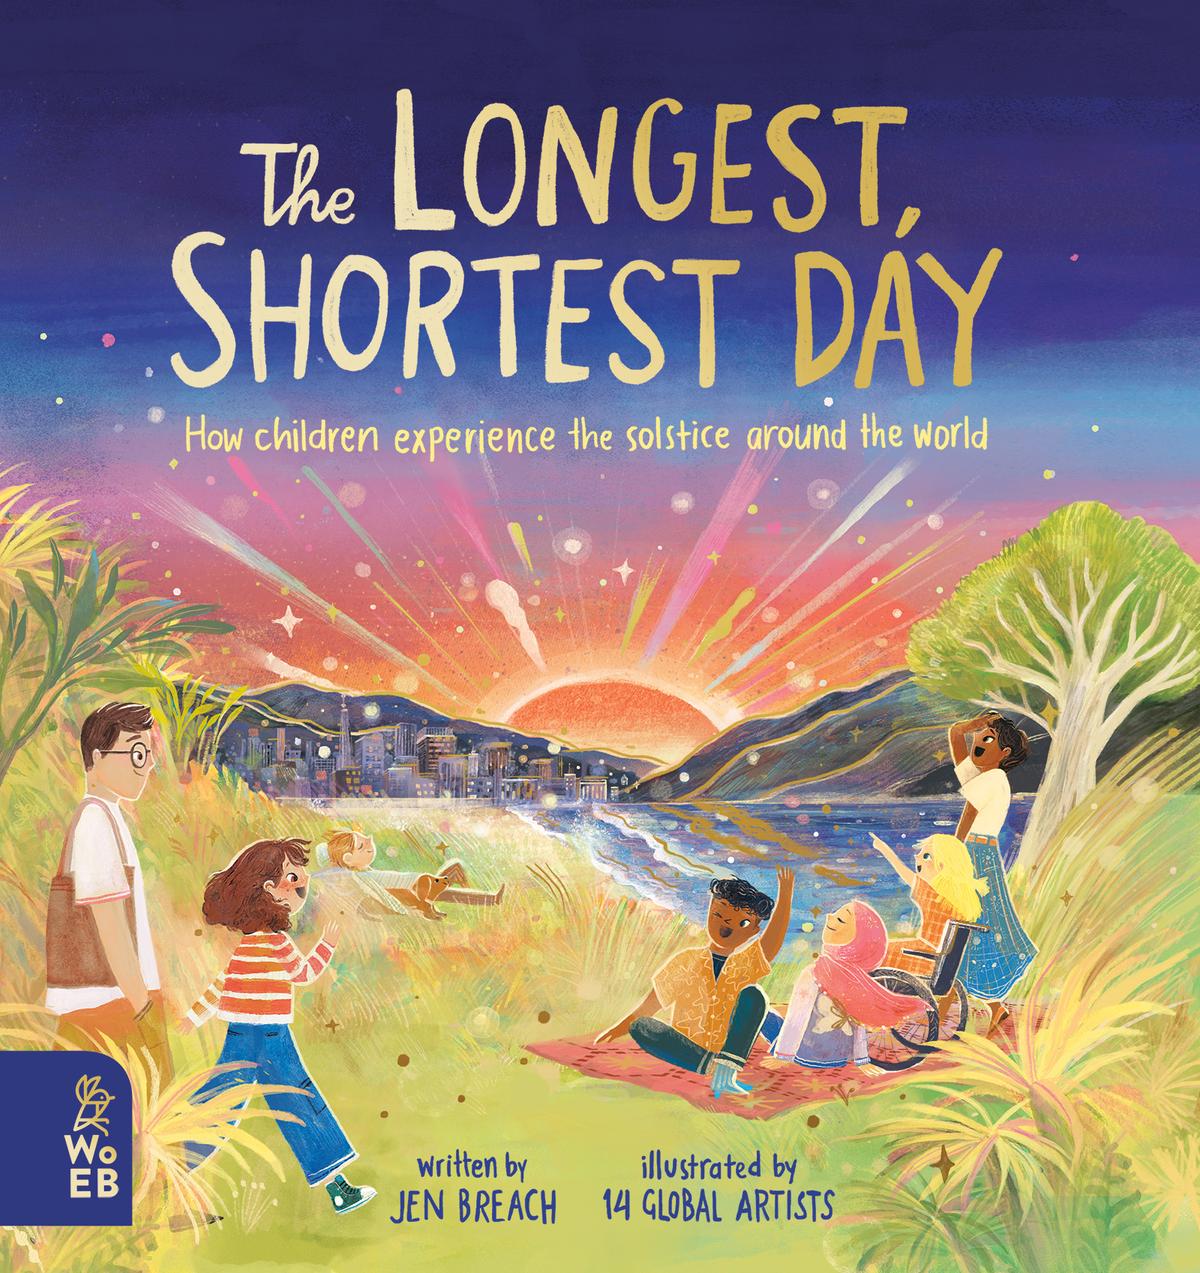 The cover image for The Longest, Shortest Day by Jen Breach shows an adult and a child approaching a picnic blanket where four other children have gathered. They are waving. In the background the sun is setting over a city on a bay, with stylized dramatic rays. - Image credit Cover illustration by Nabila Adani Putrinda